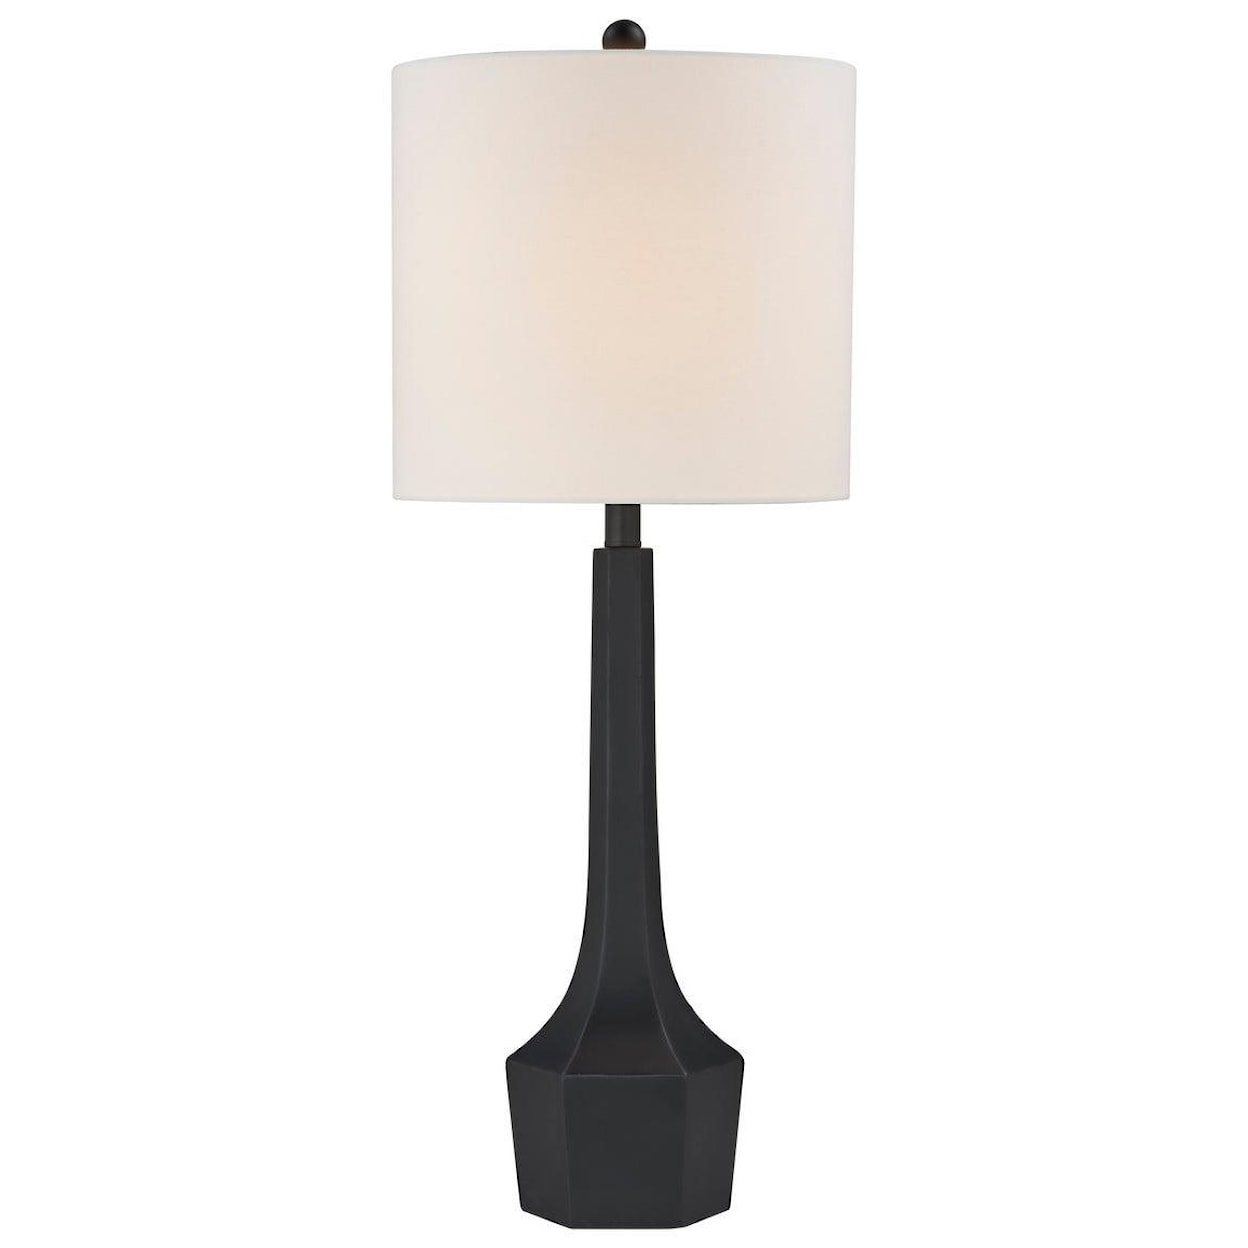 Forty West Designs Lamps GORDON TABLE LAMP